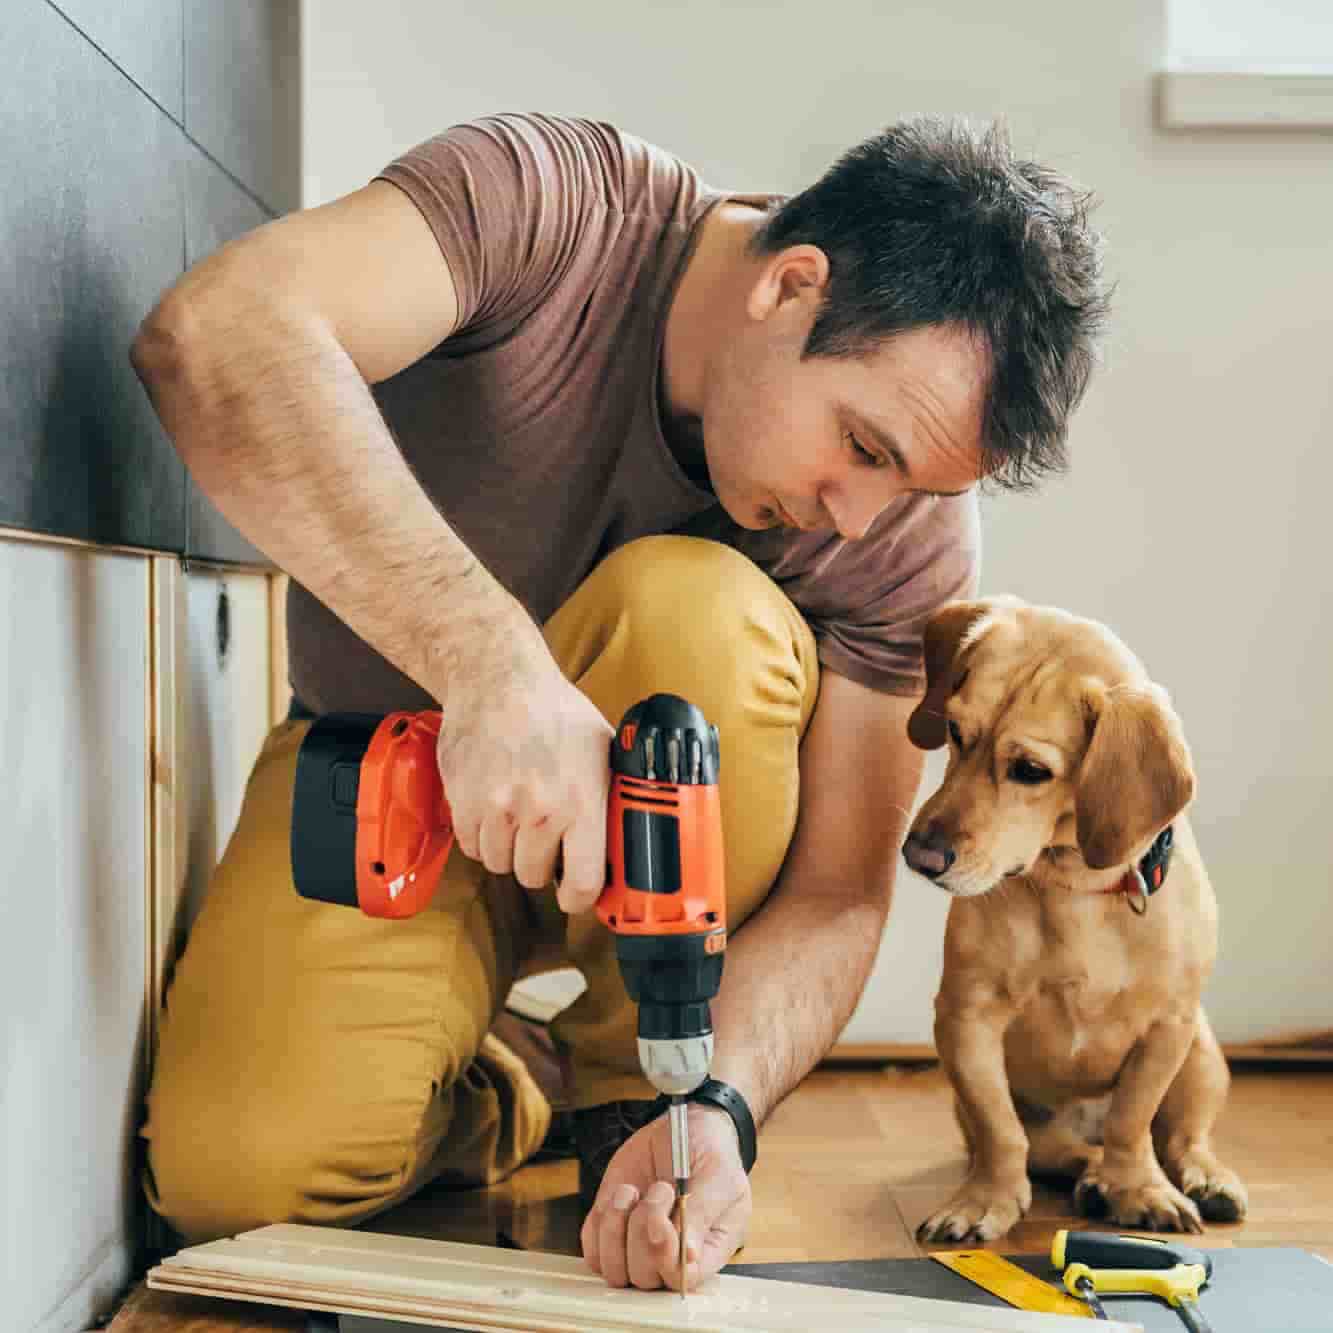 A man is using a power tool. His small dog is watching. 